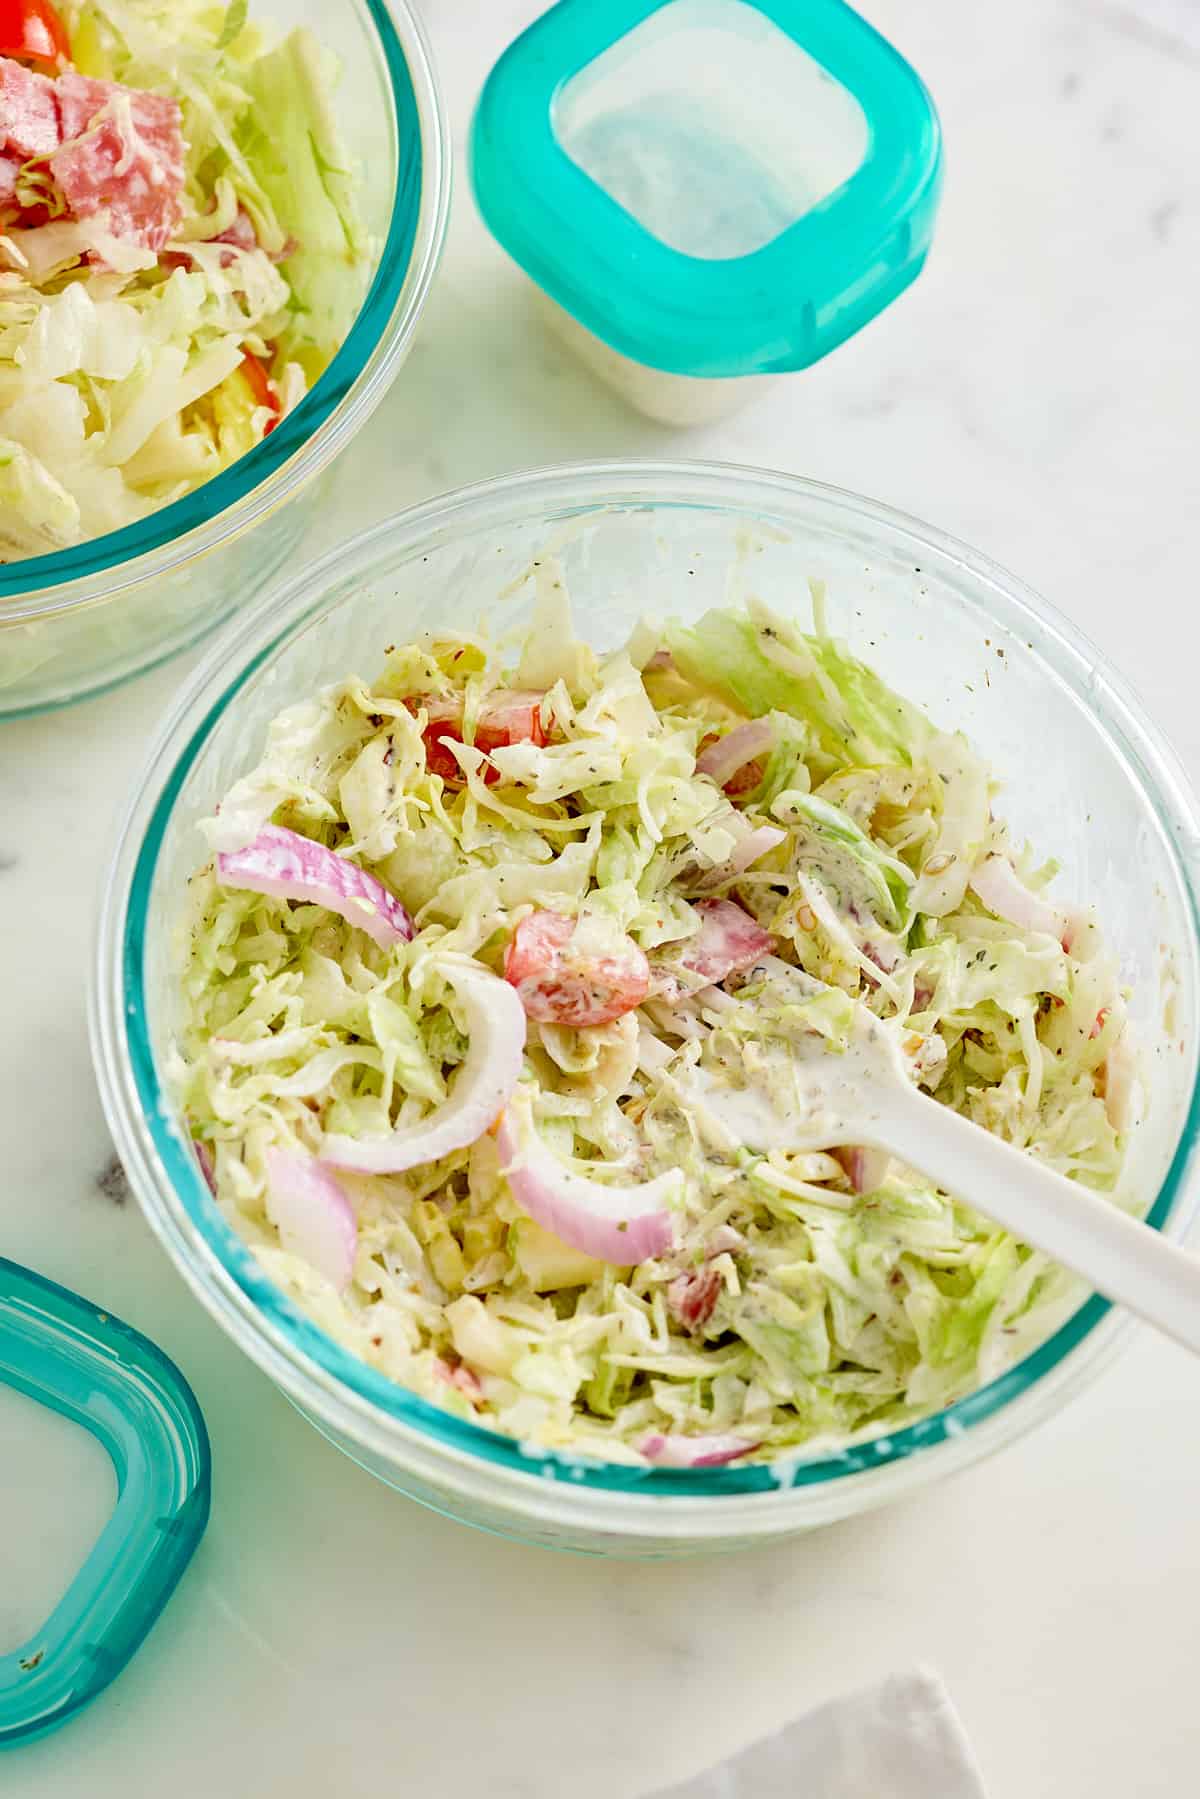 grinder salad recipe in bowl with fork sticking out